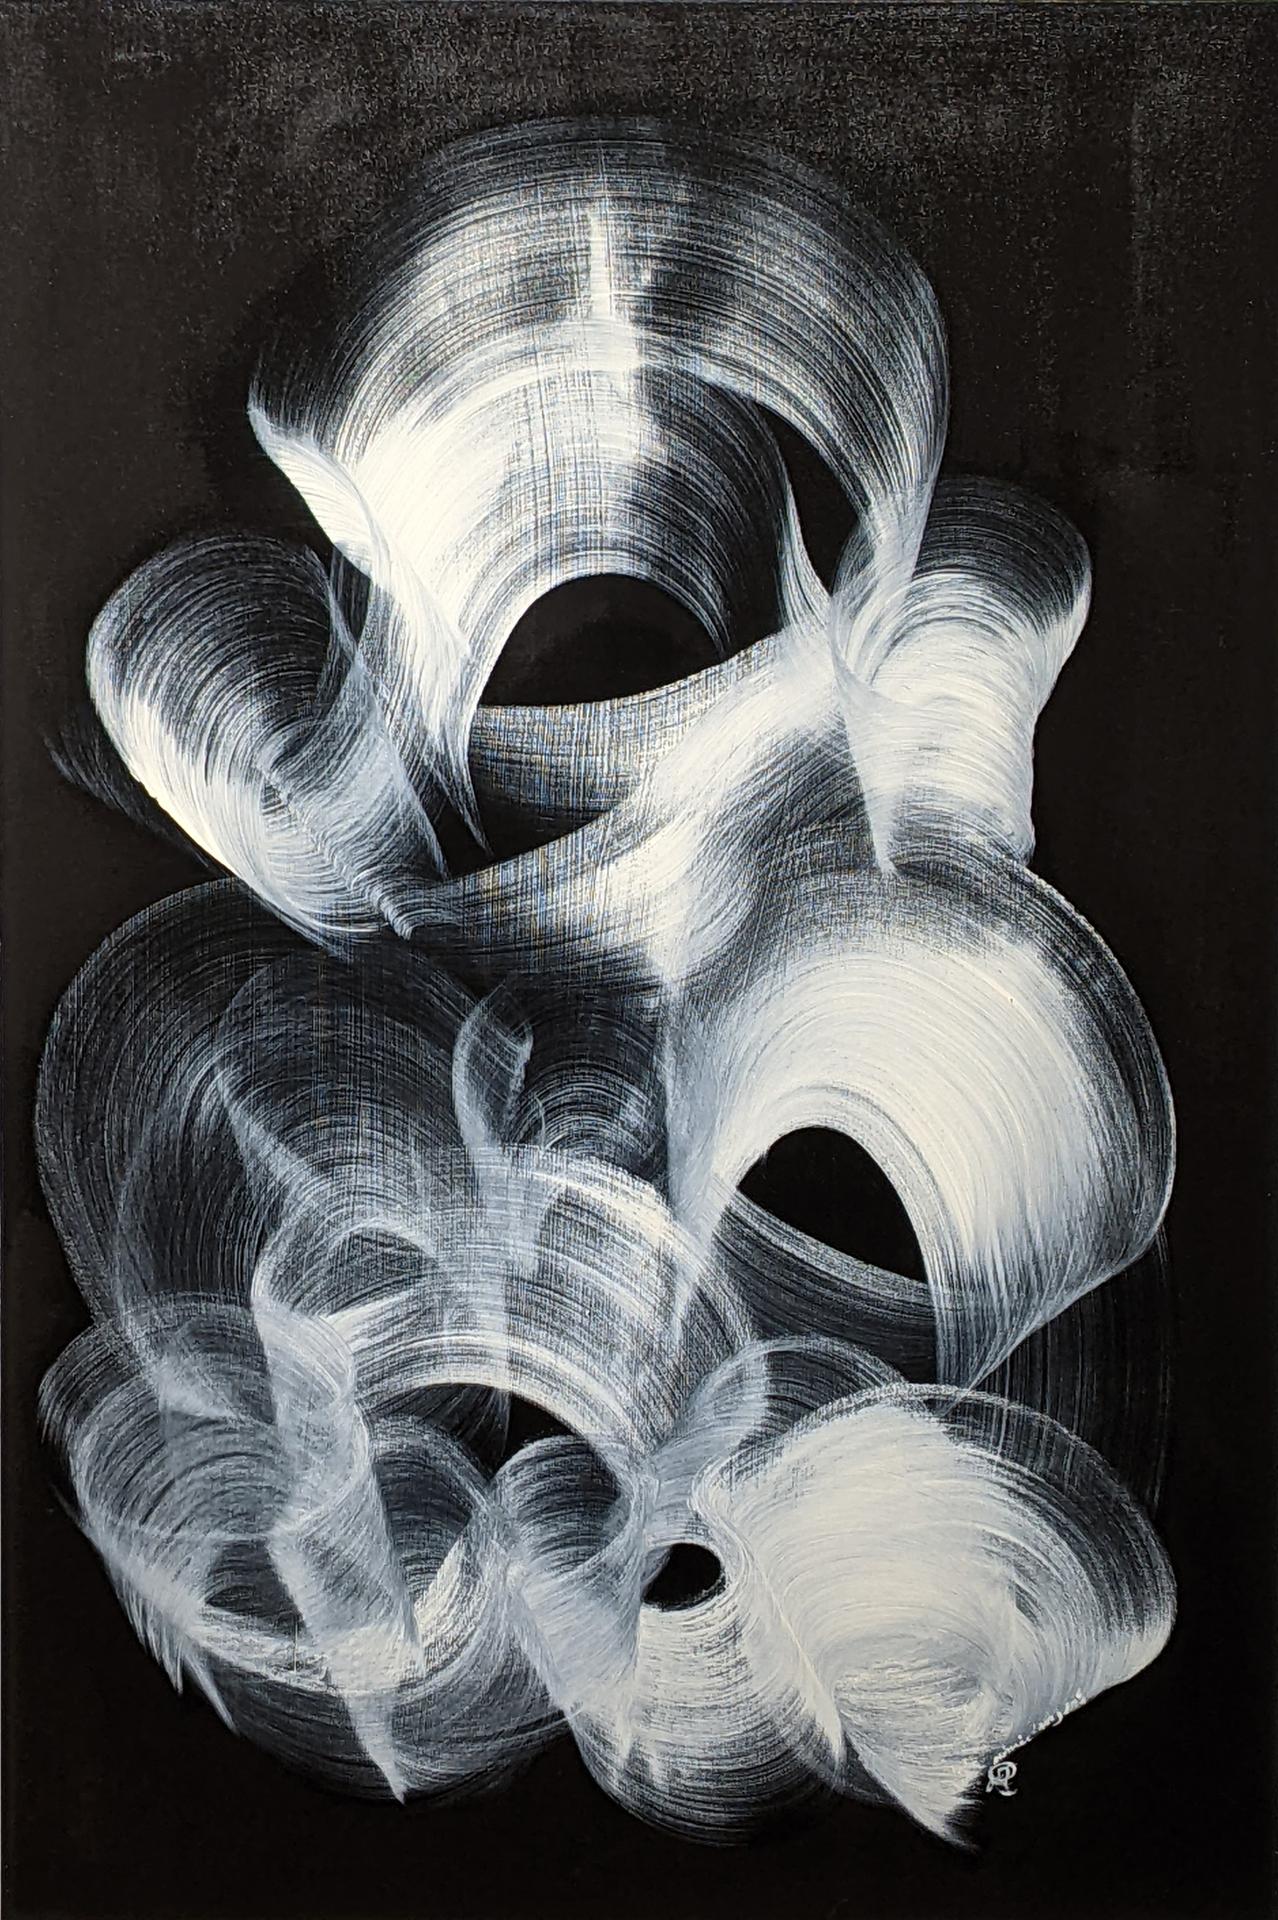 Mimie Langlois - Abstraction nº 204, 2003